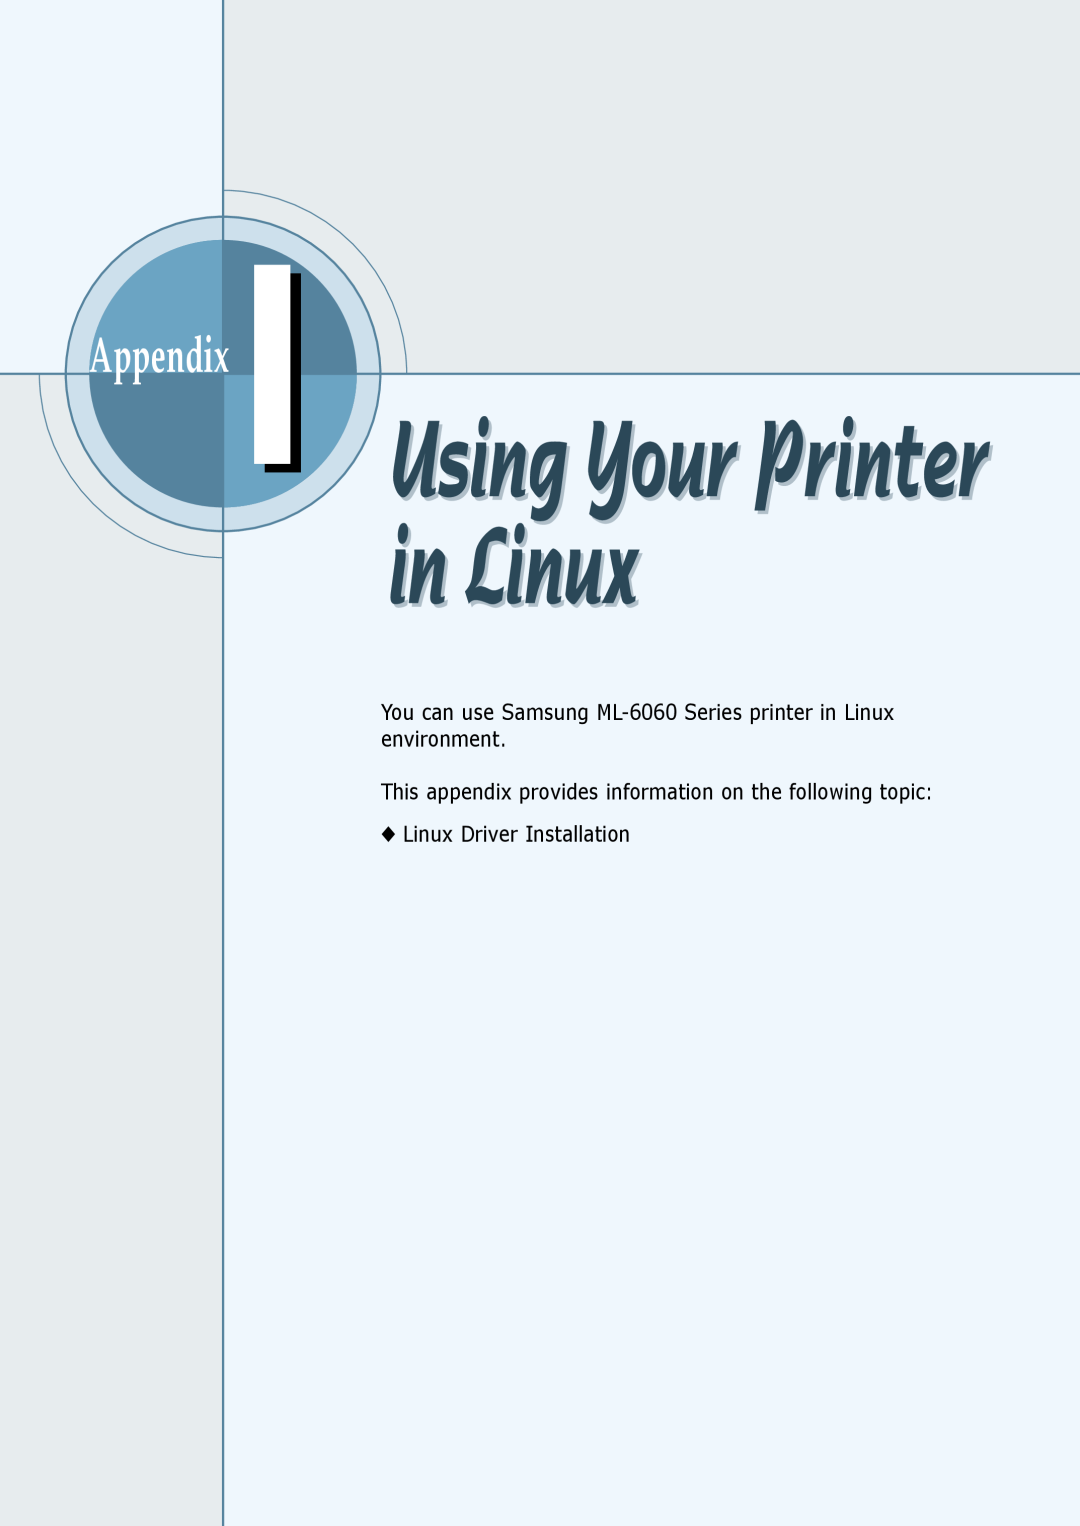 Samsung ML-6060S Appendix, You can use Samsung ML-6060 Series printer in Linux environment, Linux Driver Installation 